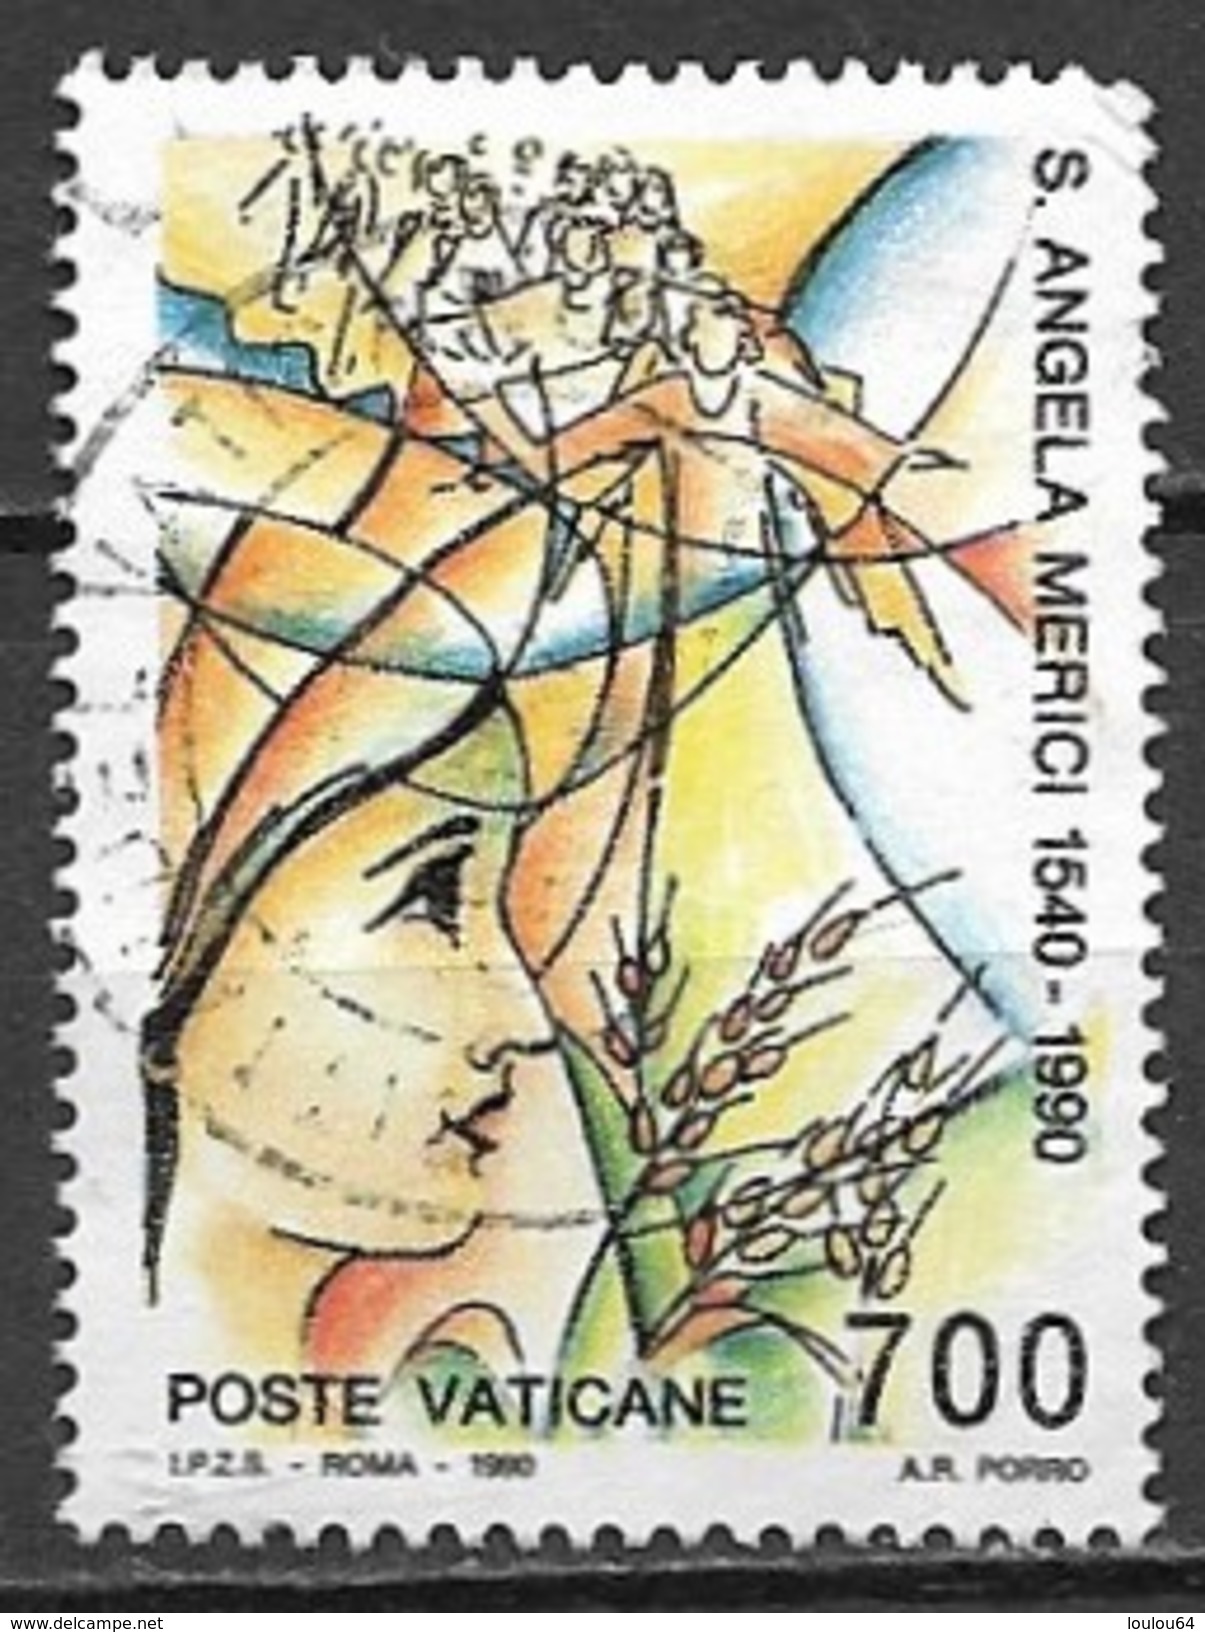 Timbres - Europe - Vatican - 1990 - 700. - N° 872 - - Usados